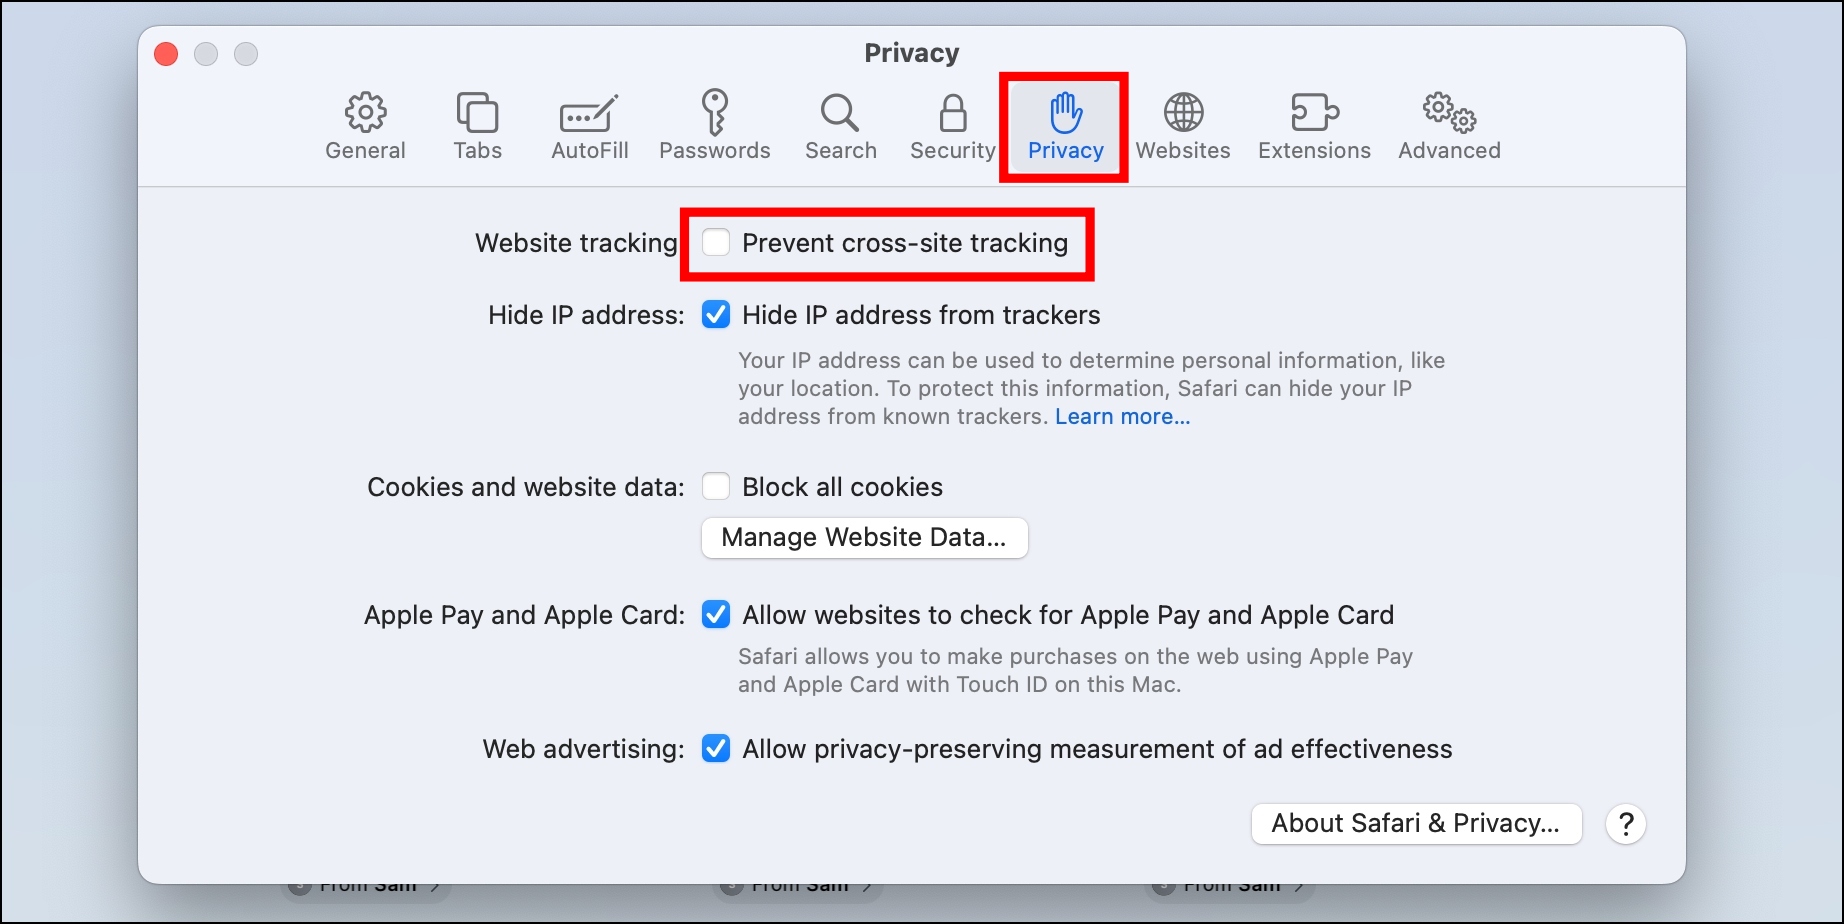 How to Prevent Cross-Site Tracking in Safari on Mac?